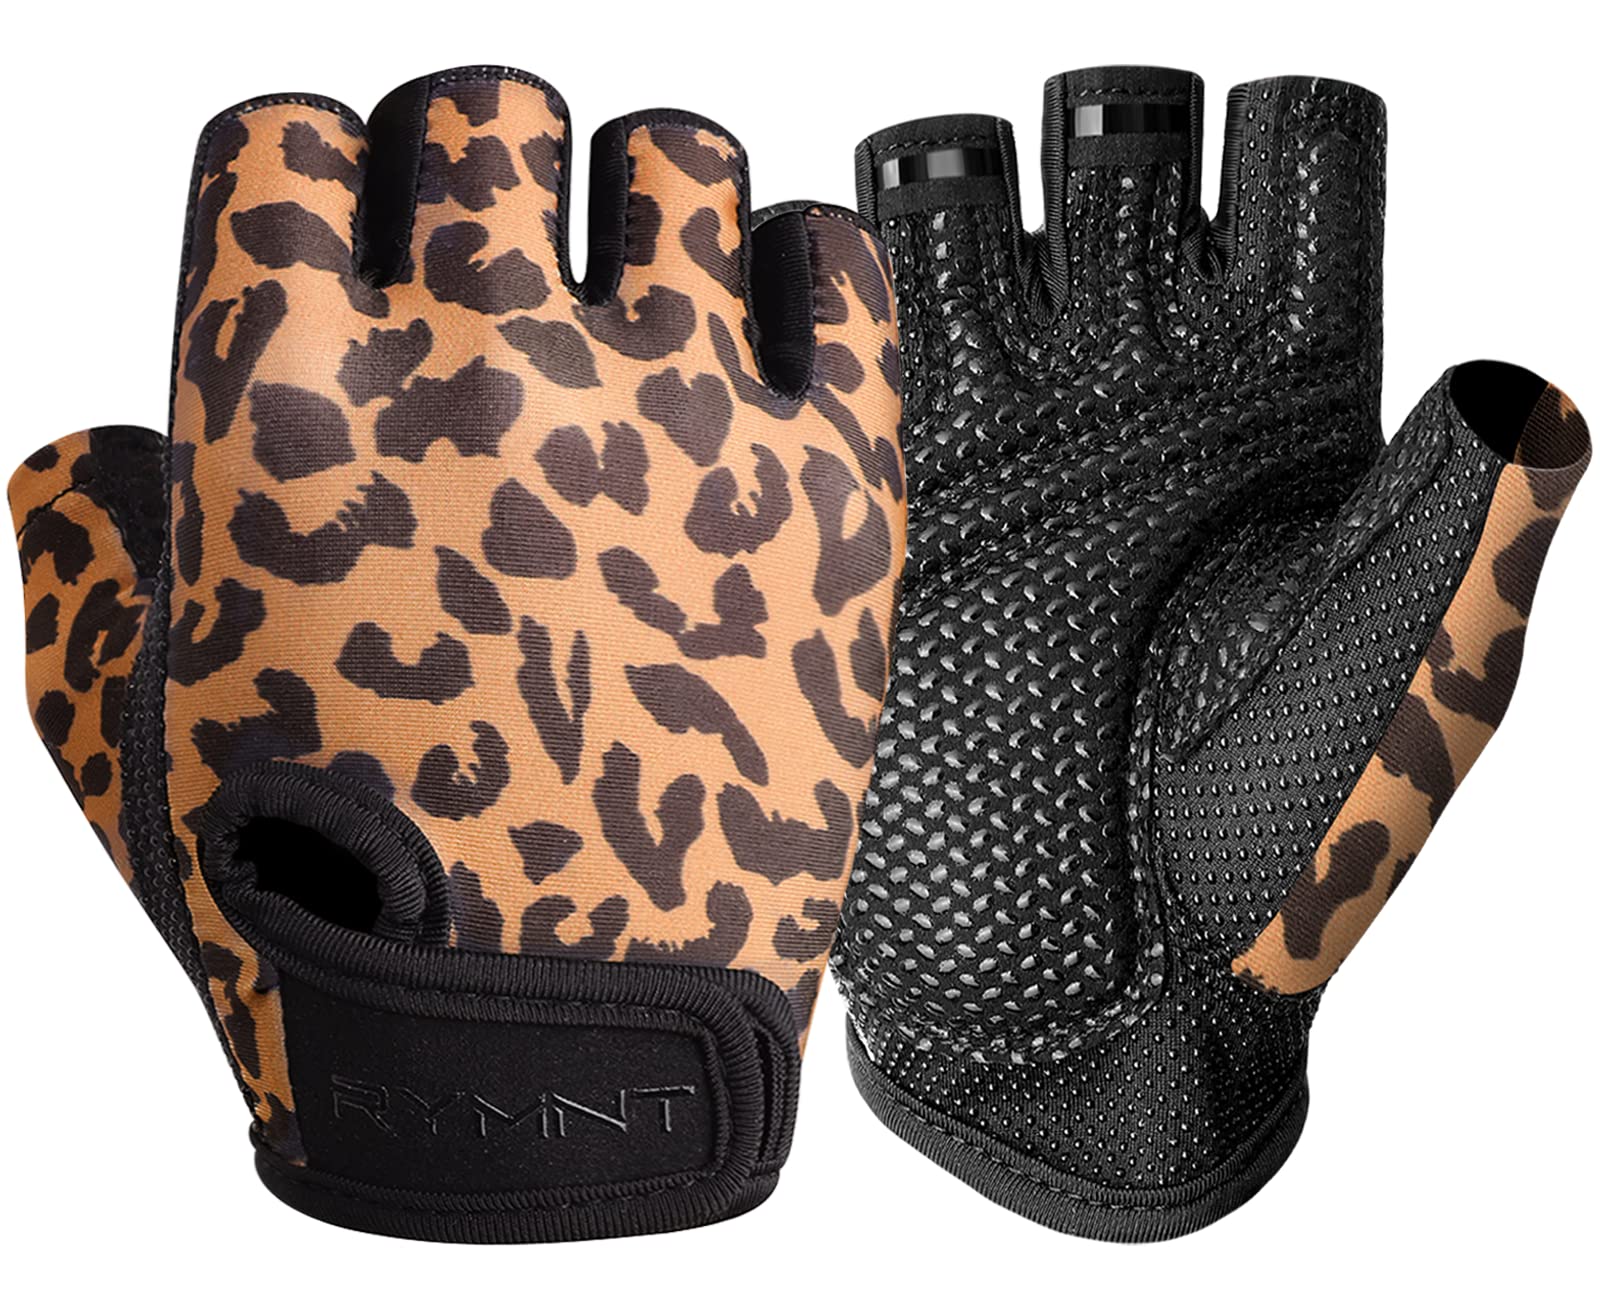 ZEROFIRE Workout Gloves for Women Men - Weight Lifting Gloves with Full  Palm Protection & Extra Grip for  Gym,Weightlifting,Fitness,Exercise,Training.Cycling A1-Leopard Medium